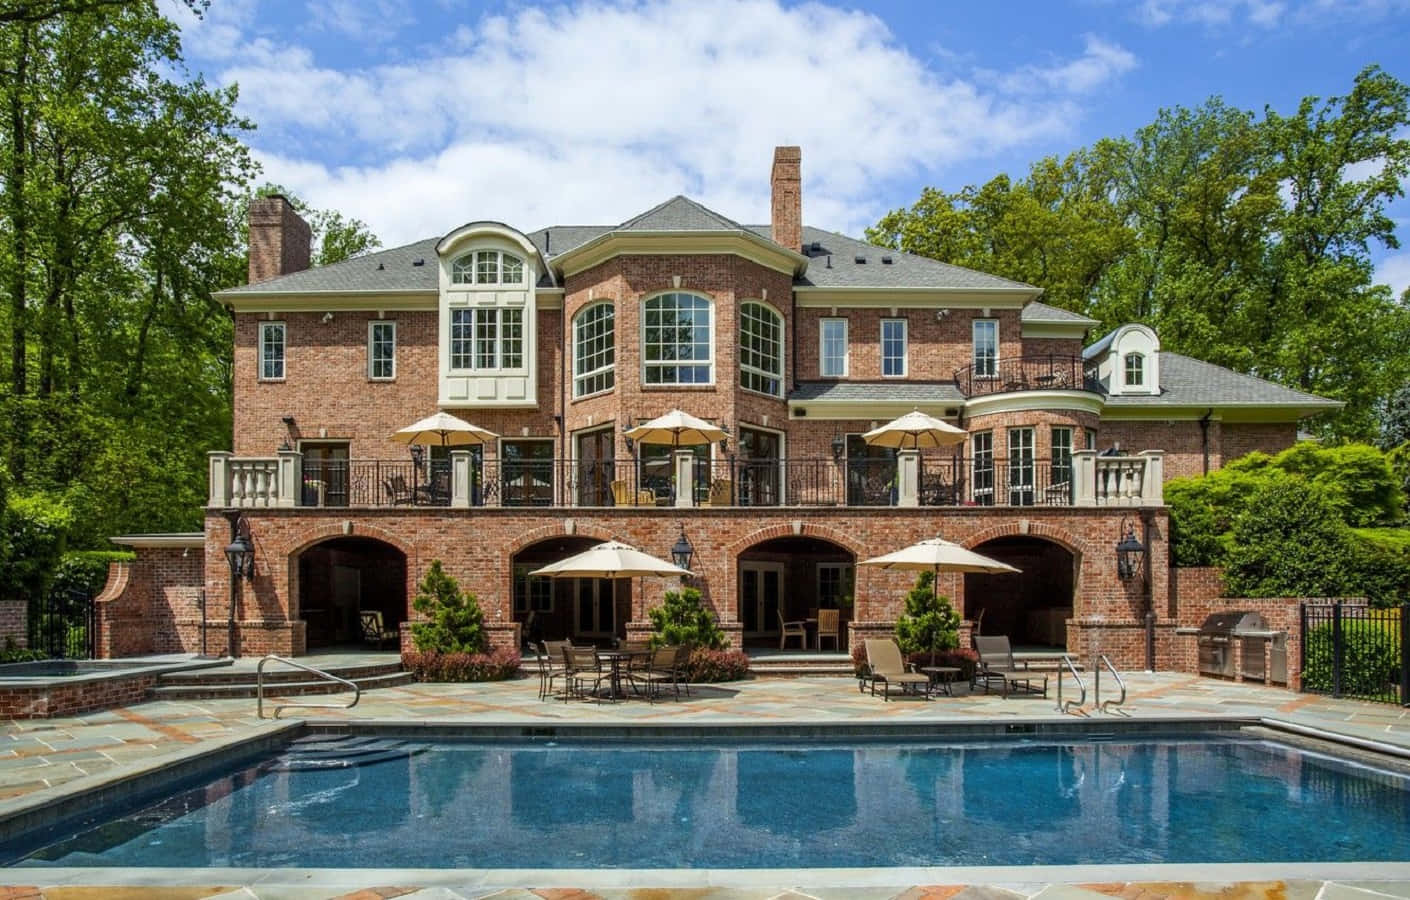 A Large Brick Home With A Pool And Patio